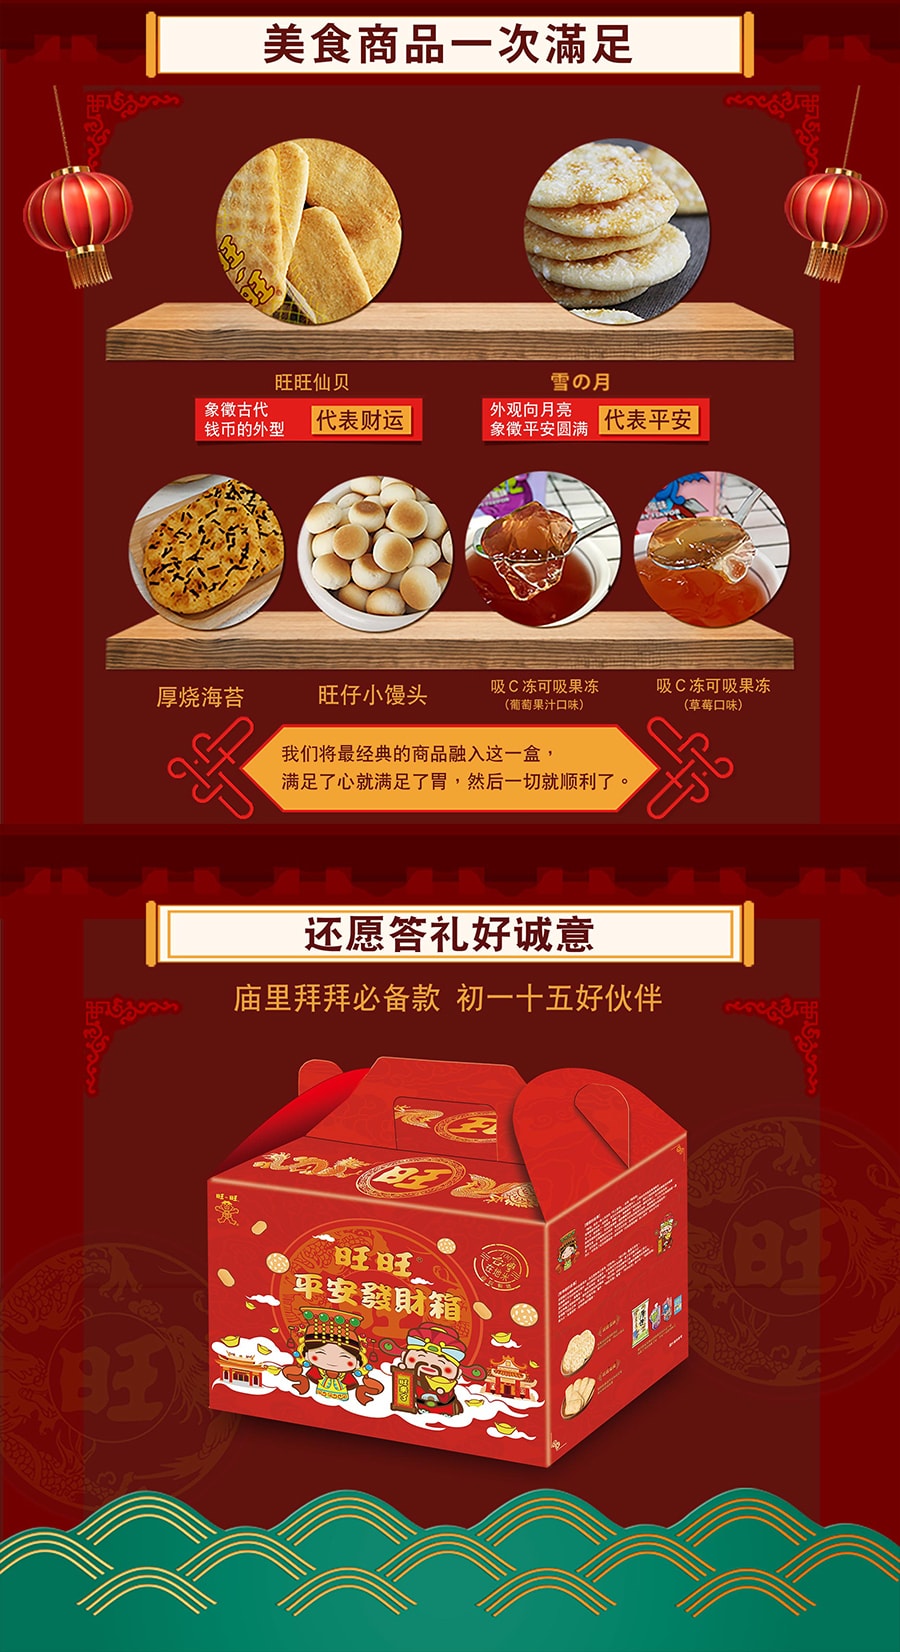 Taiwan Wishing Wealth and Safe Snack Gift Box (Red Box) 857g*2入 1714g